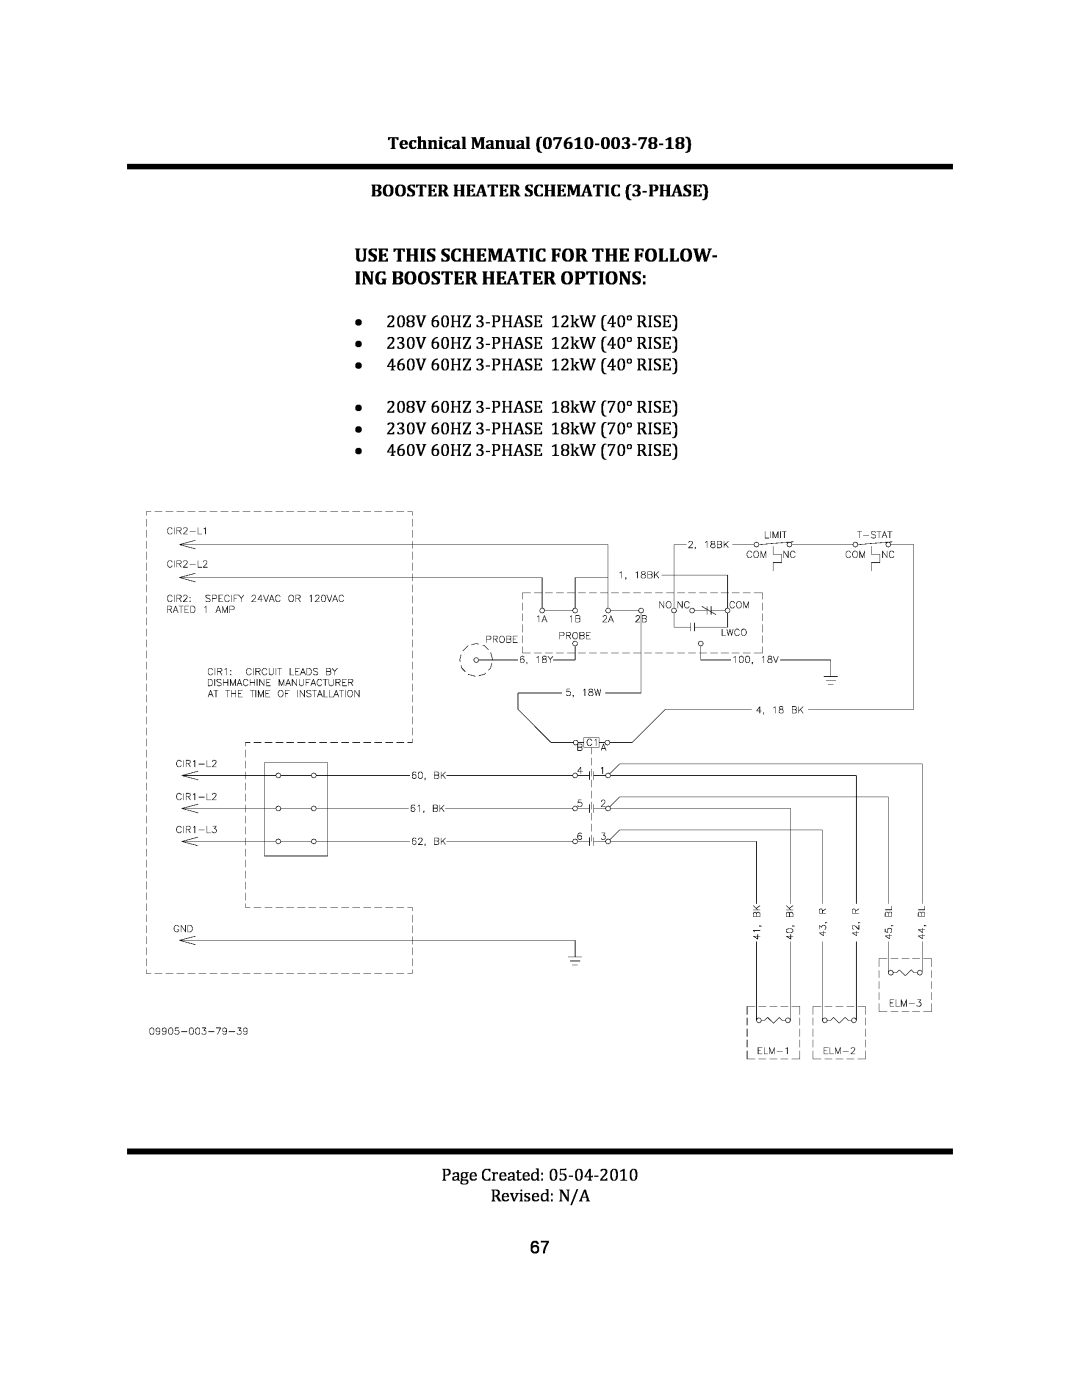 Jackson CREW 66S, CREW 44S manual Use This Schematic For The Follow‐ Ing Booster Heater Options 